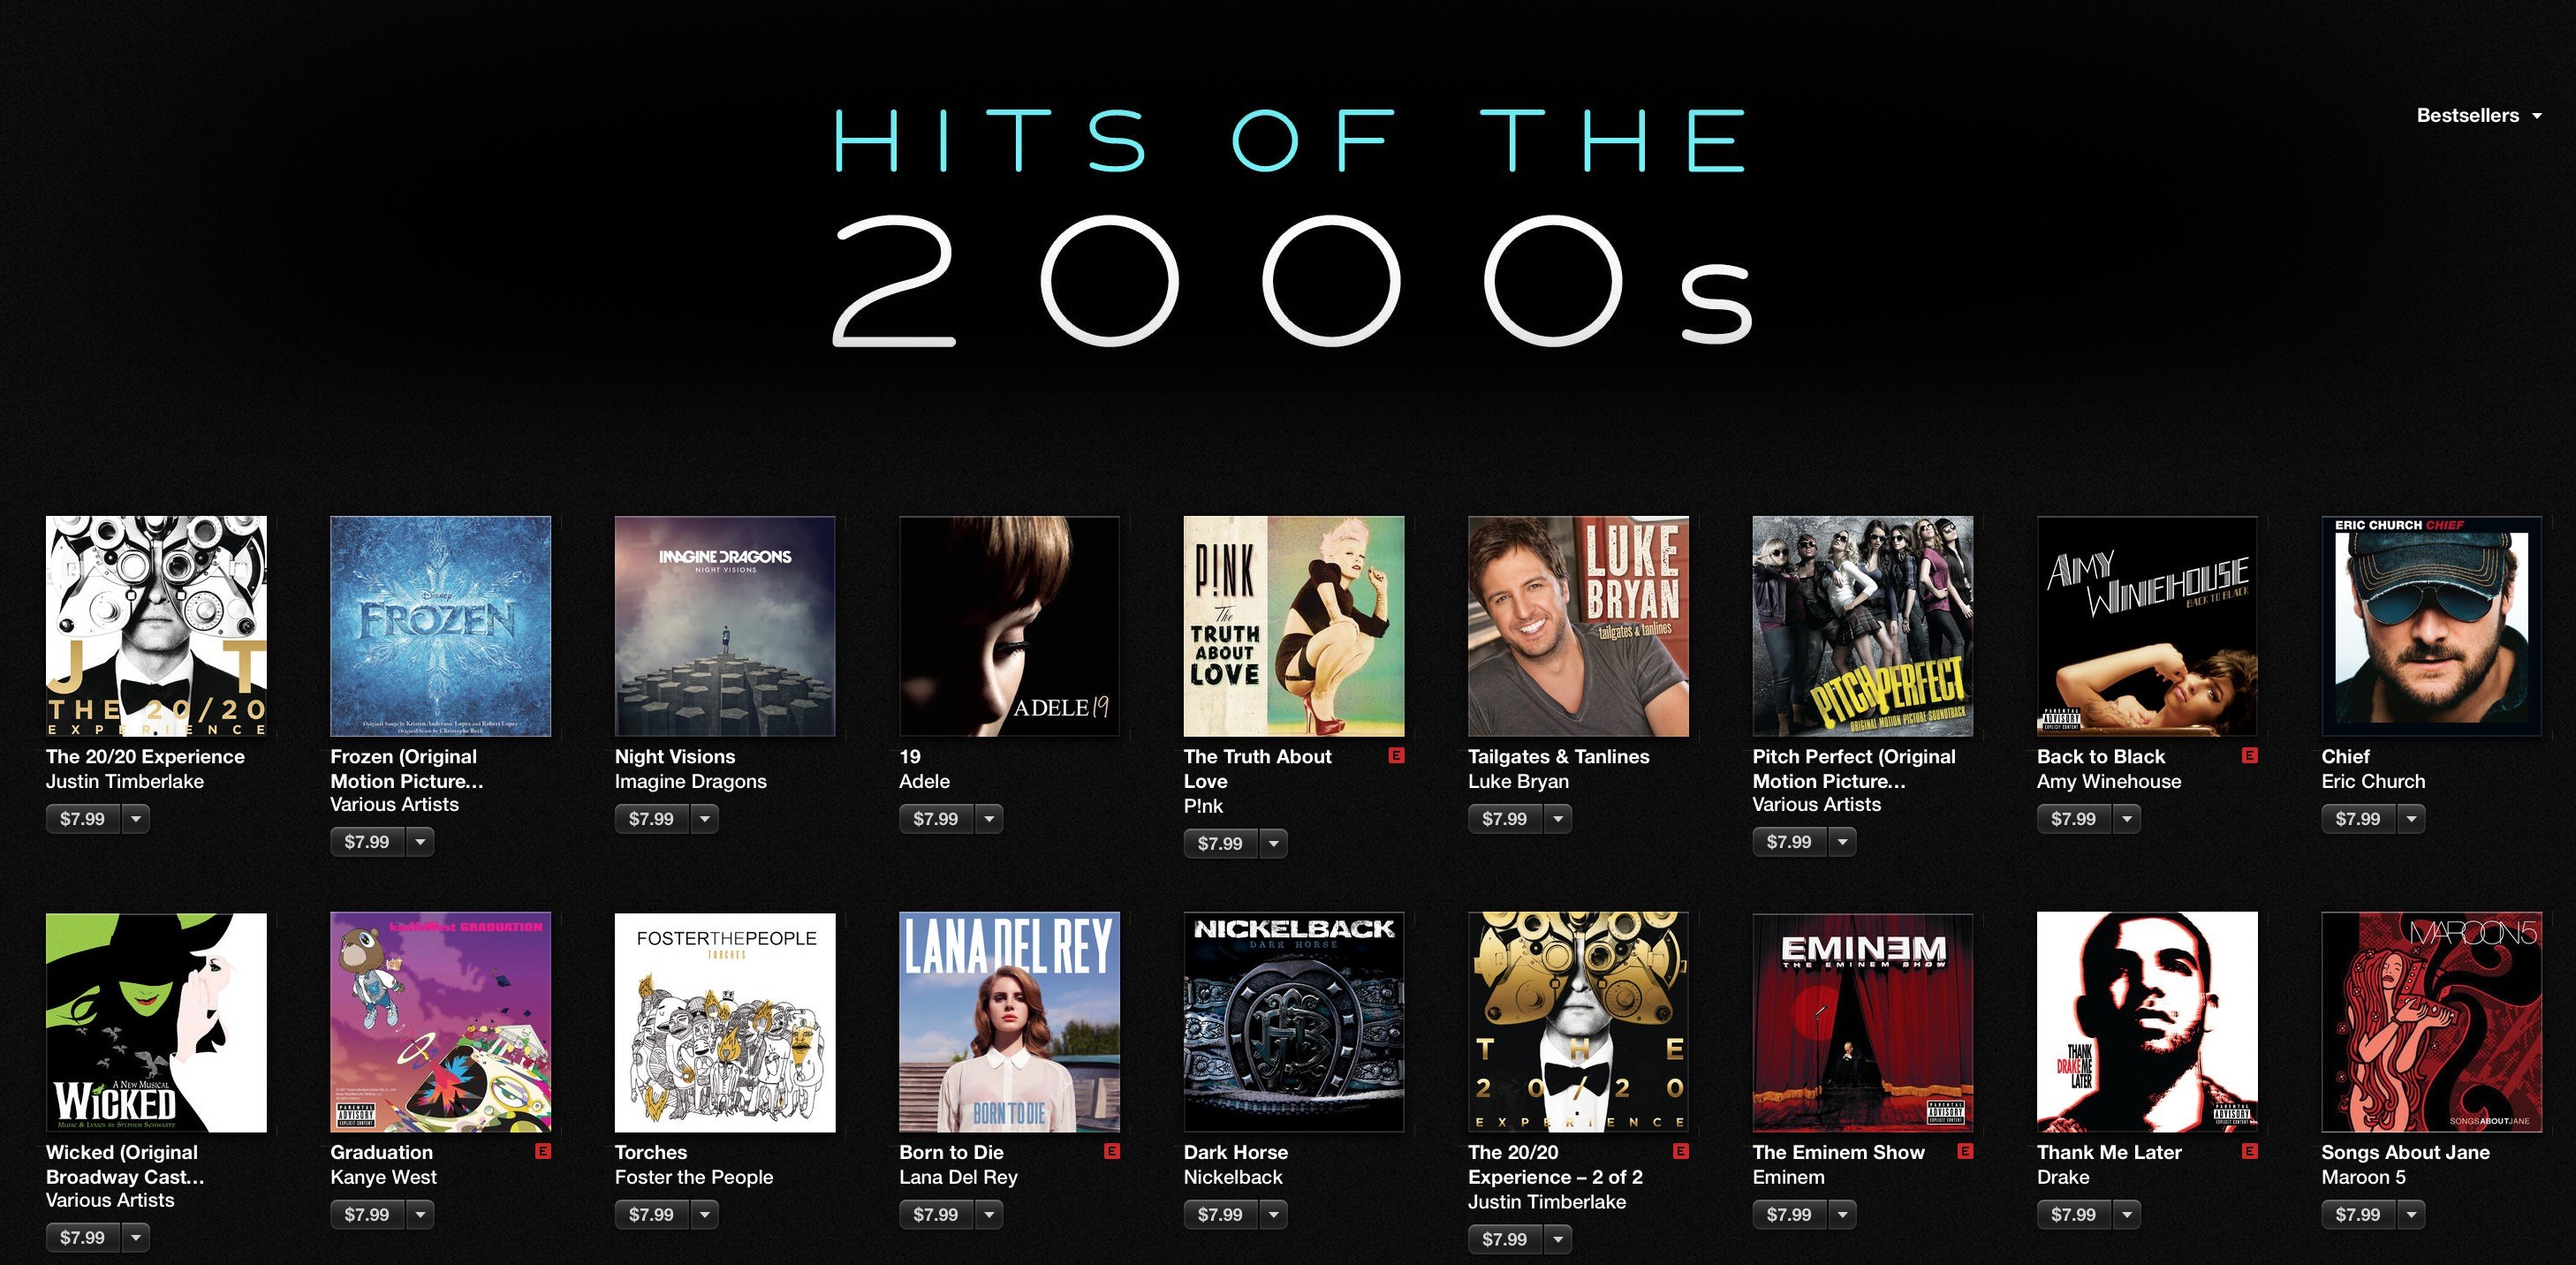 Apple Highlights "Hits of the 2000s," Lowers Music Album Prices to Just